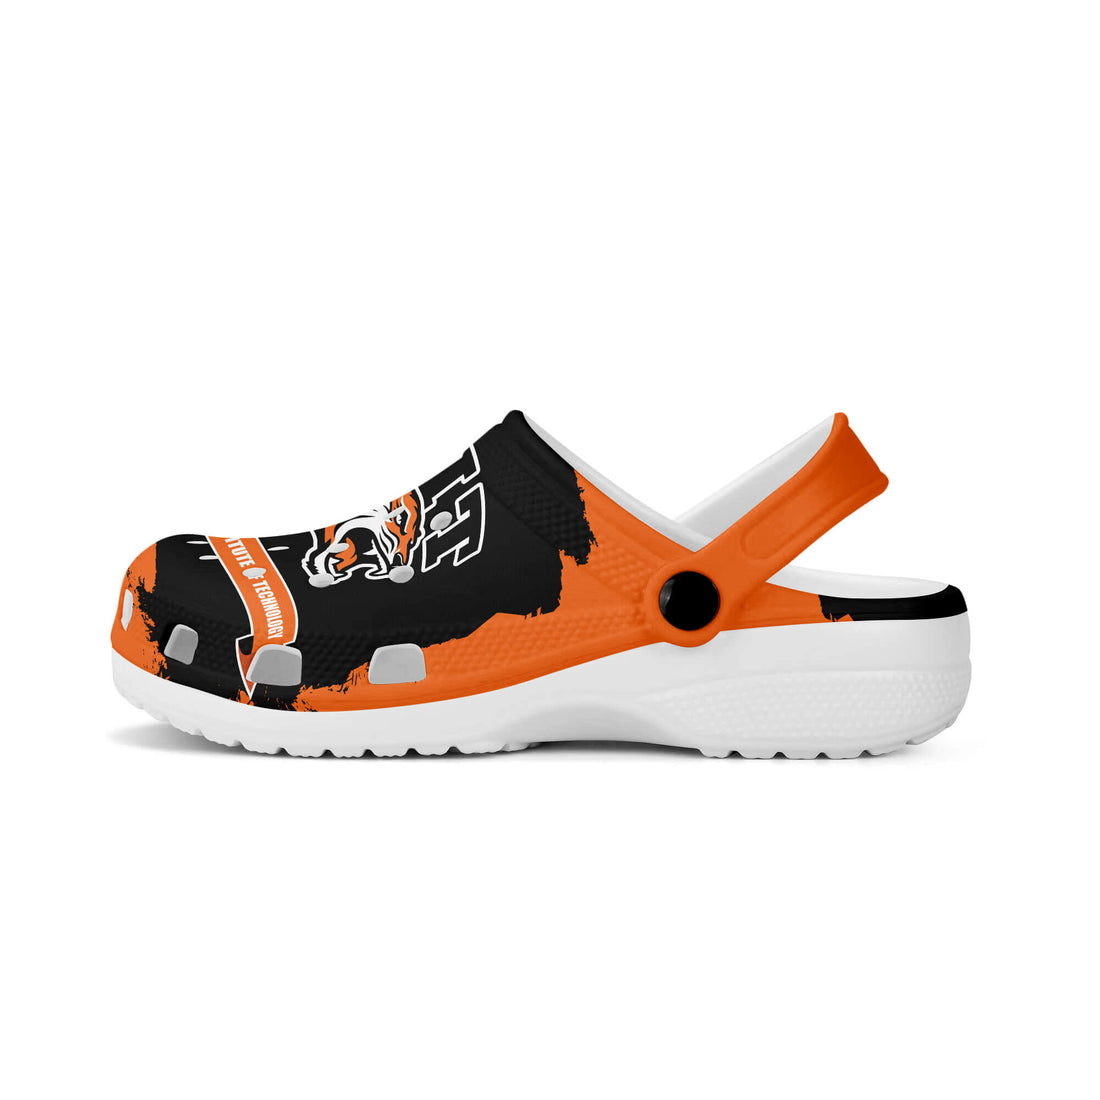 Rochester Institute of Technology Men's Clogs